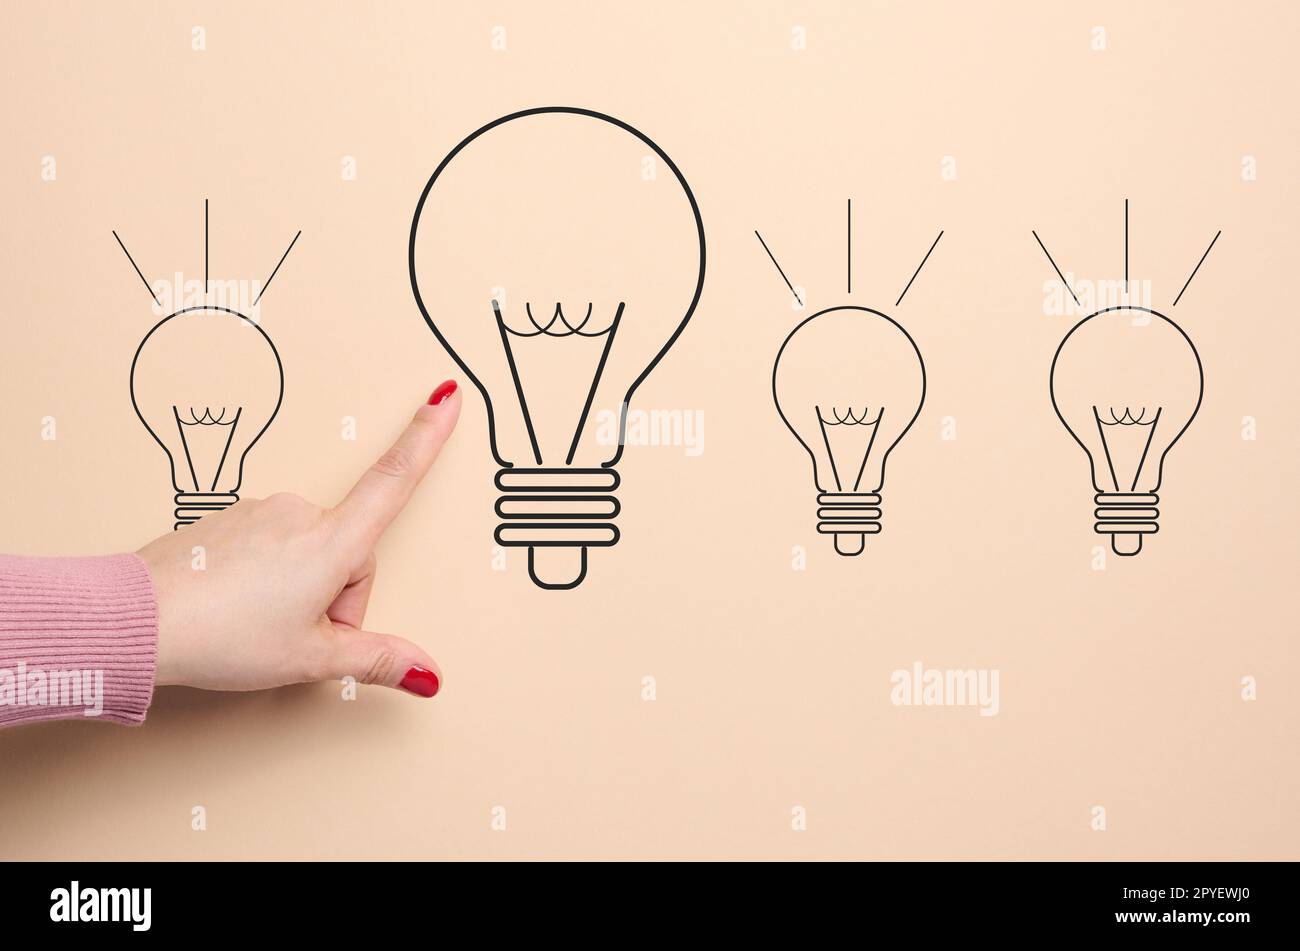 A drawn light bulb and a female hand pointing at it, concept of searching for new ideas, innovation Stock Photo